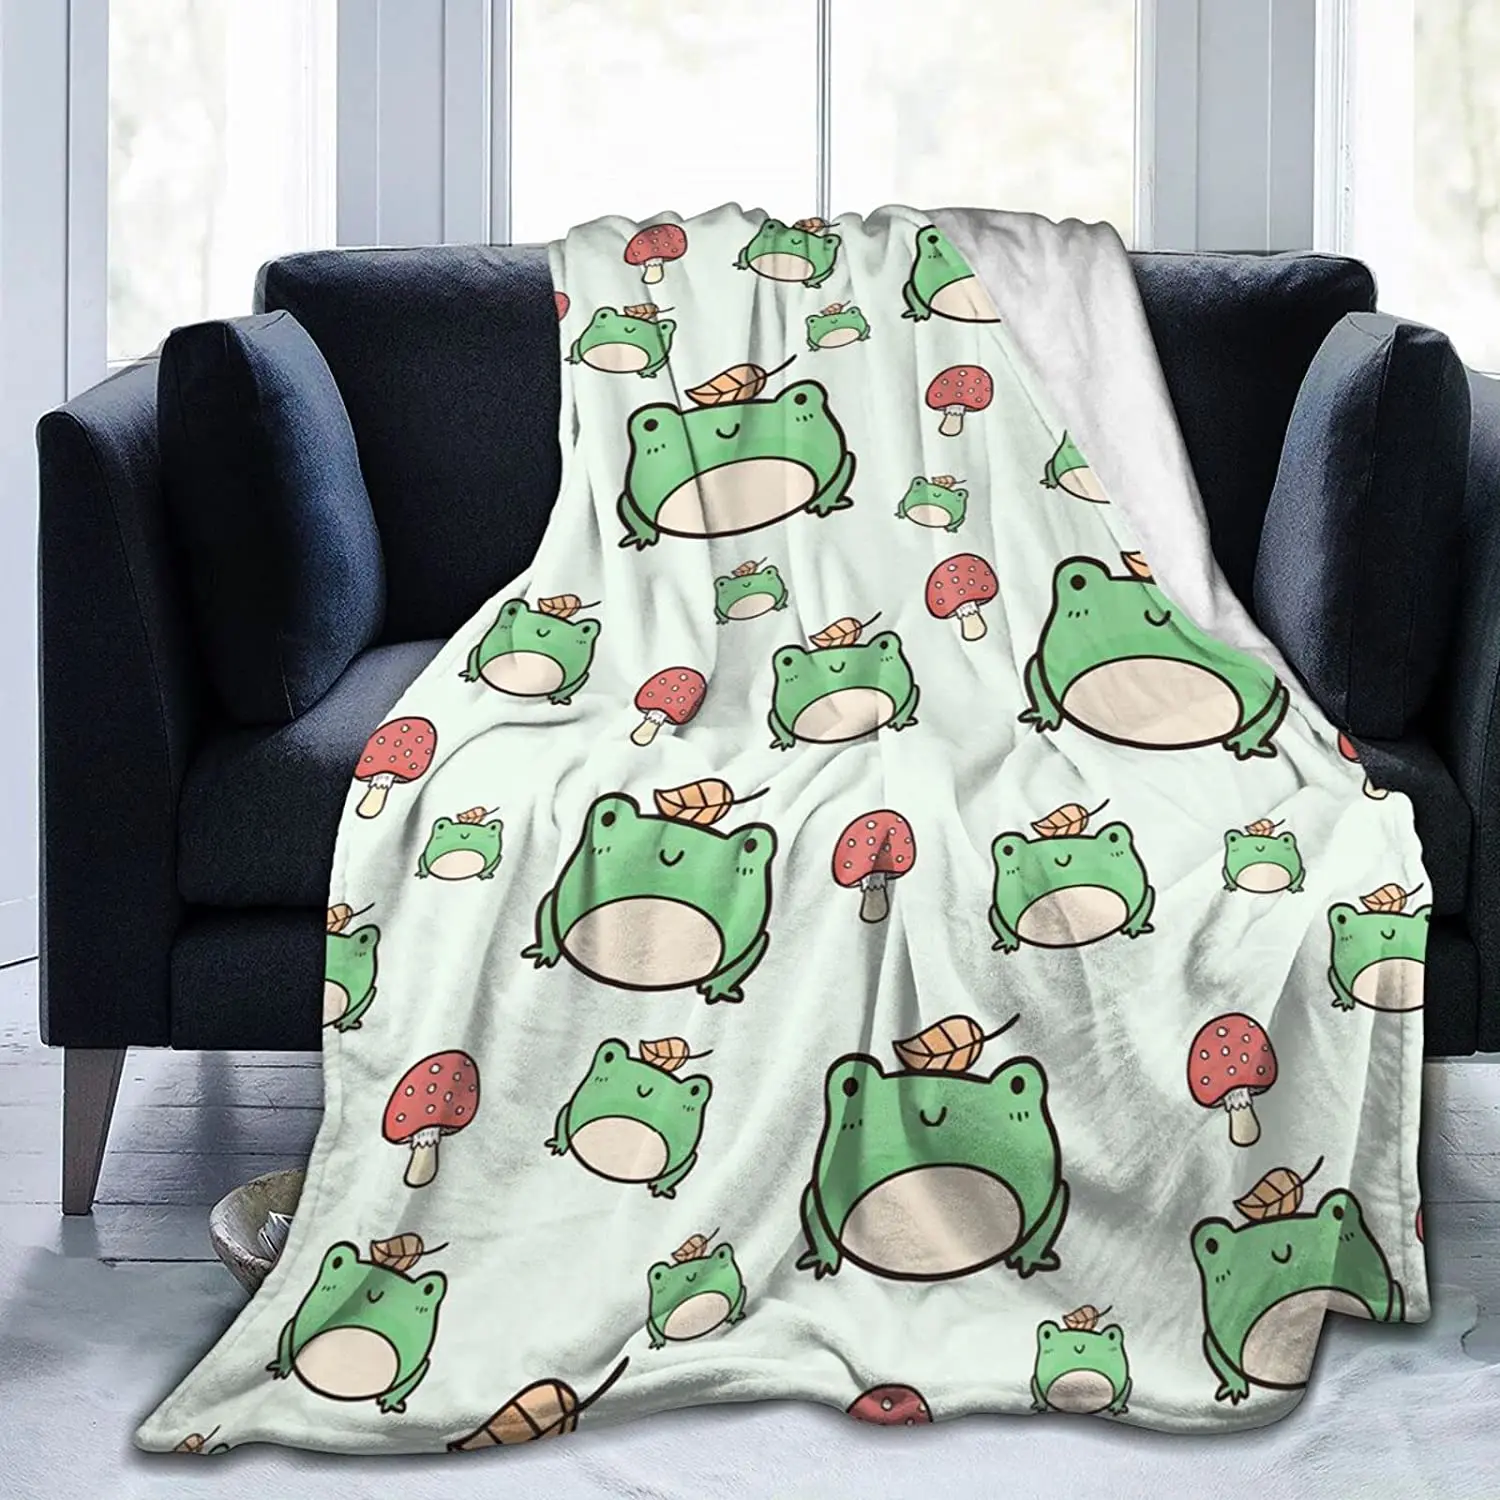 

Cute Green Frog Blanket , Flannel Blanket Fluffy Cozy Fuzzy Throws Non-Shedding for Nap Bed Sofa Couch Home Decor